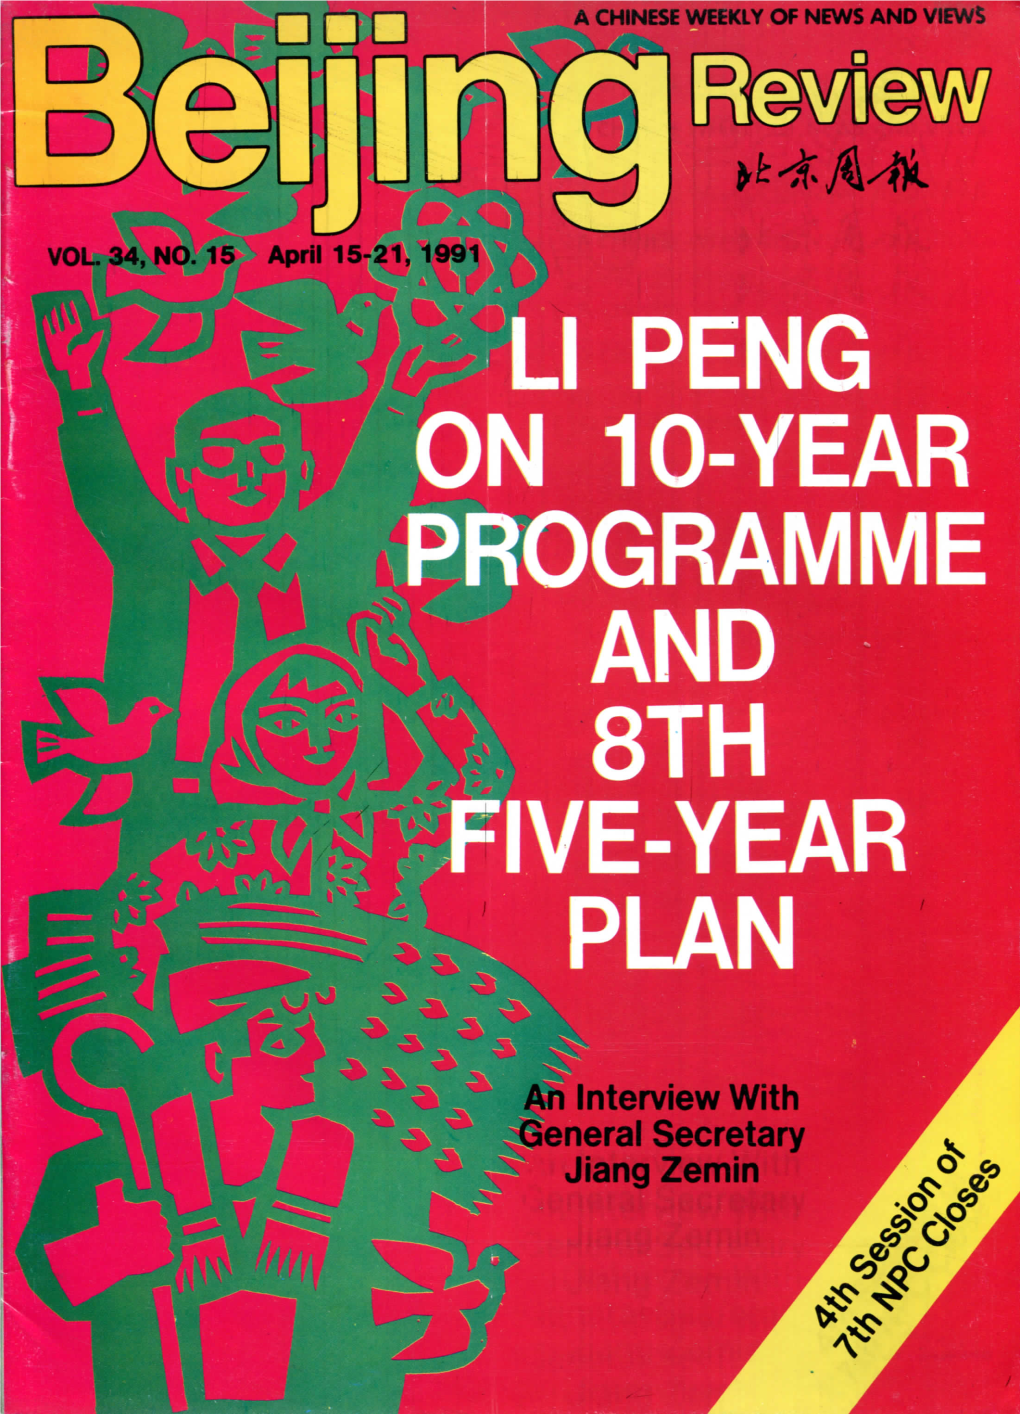 Li Peng on 10-Year Programme and 8Th Ive